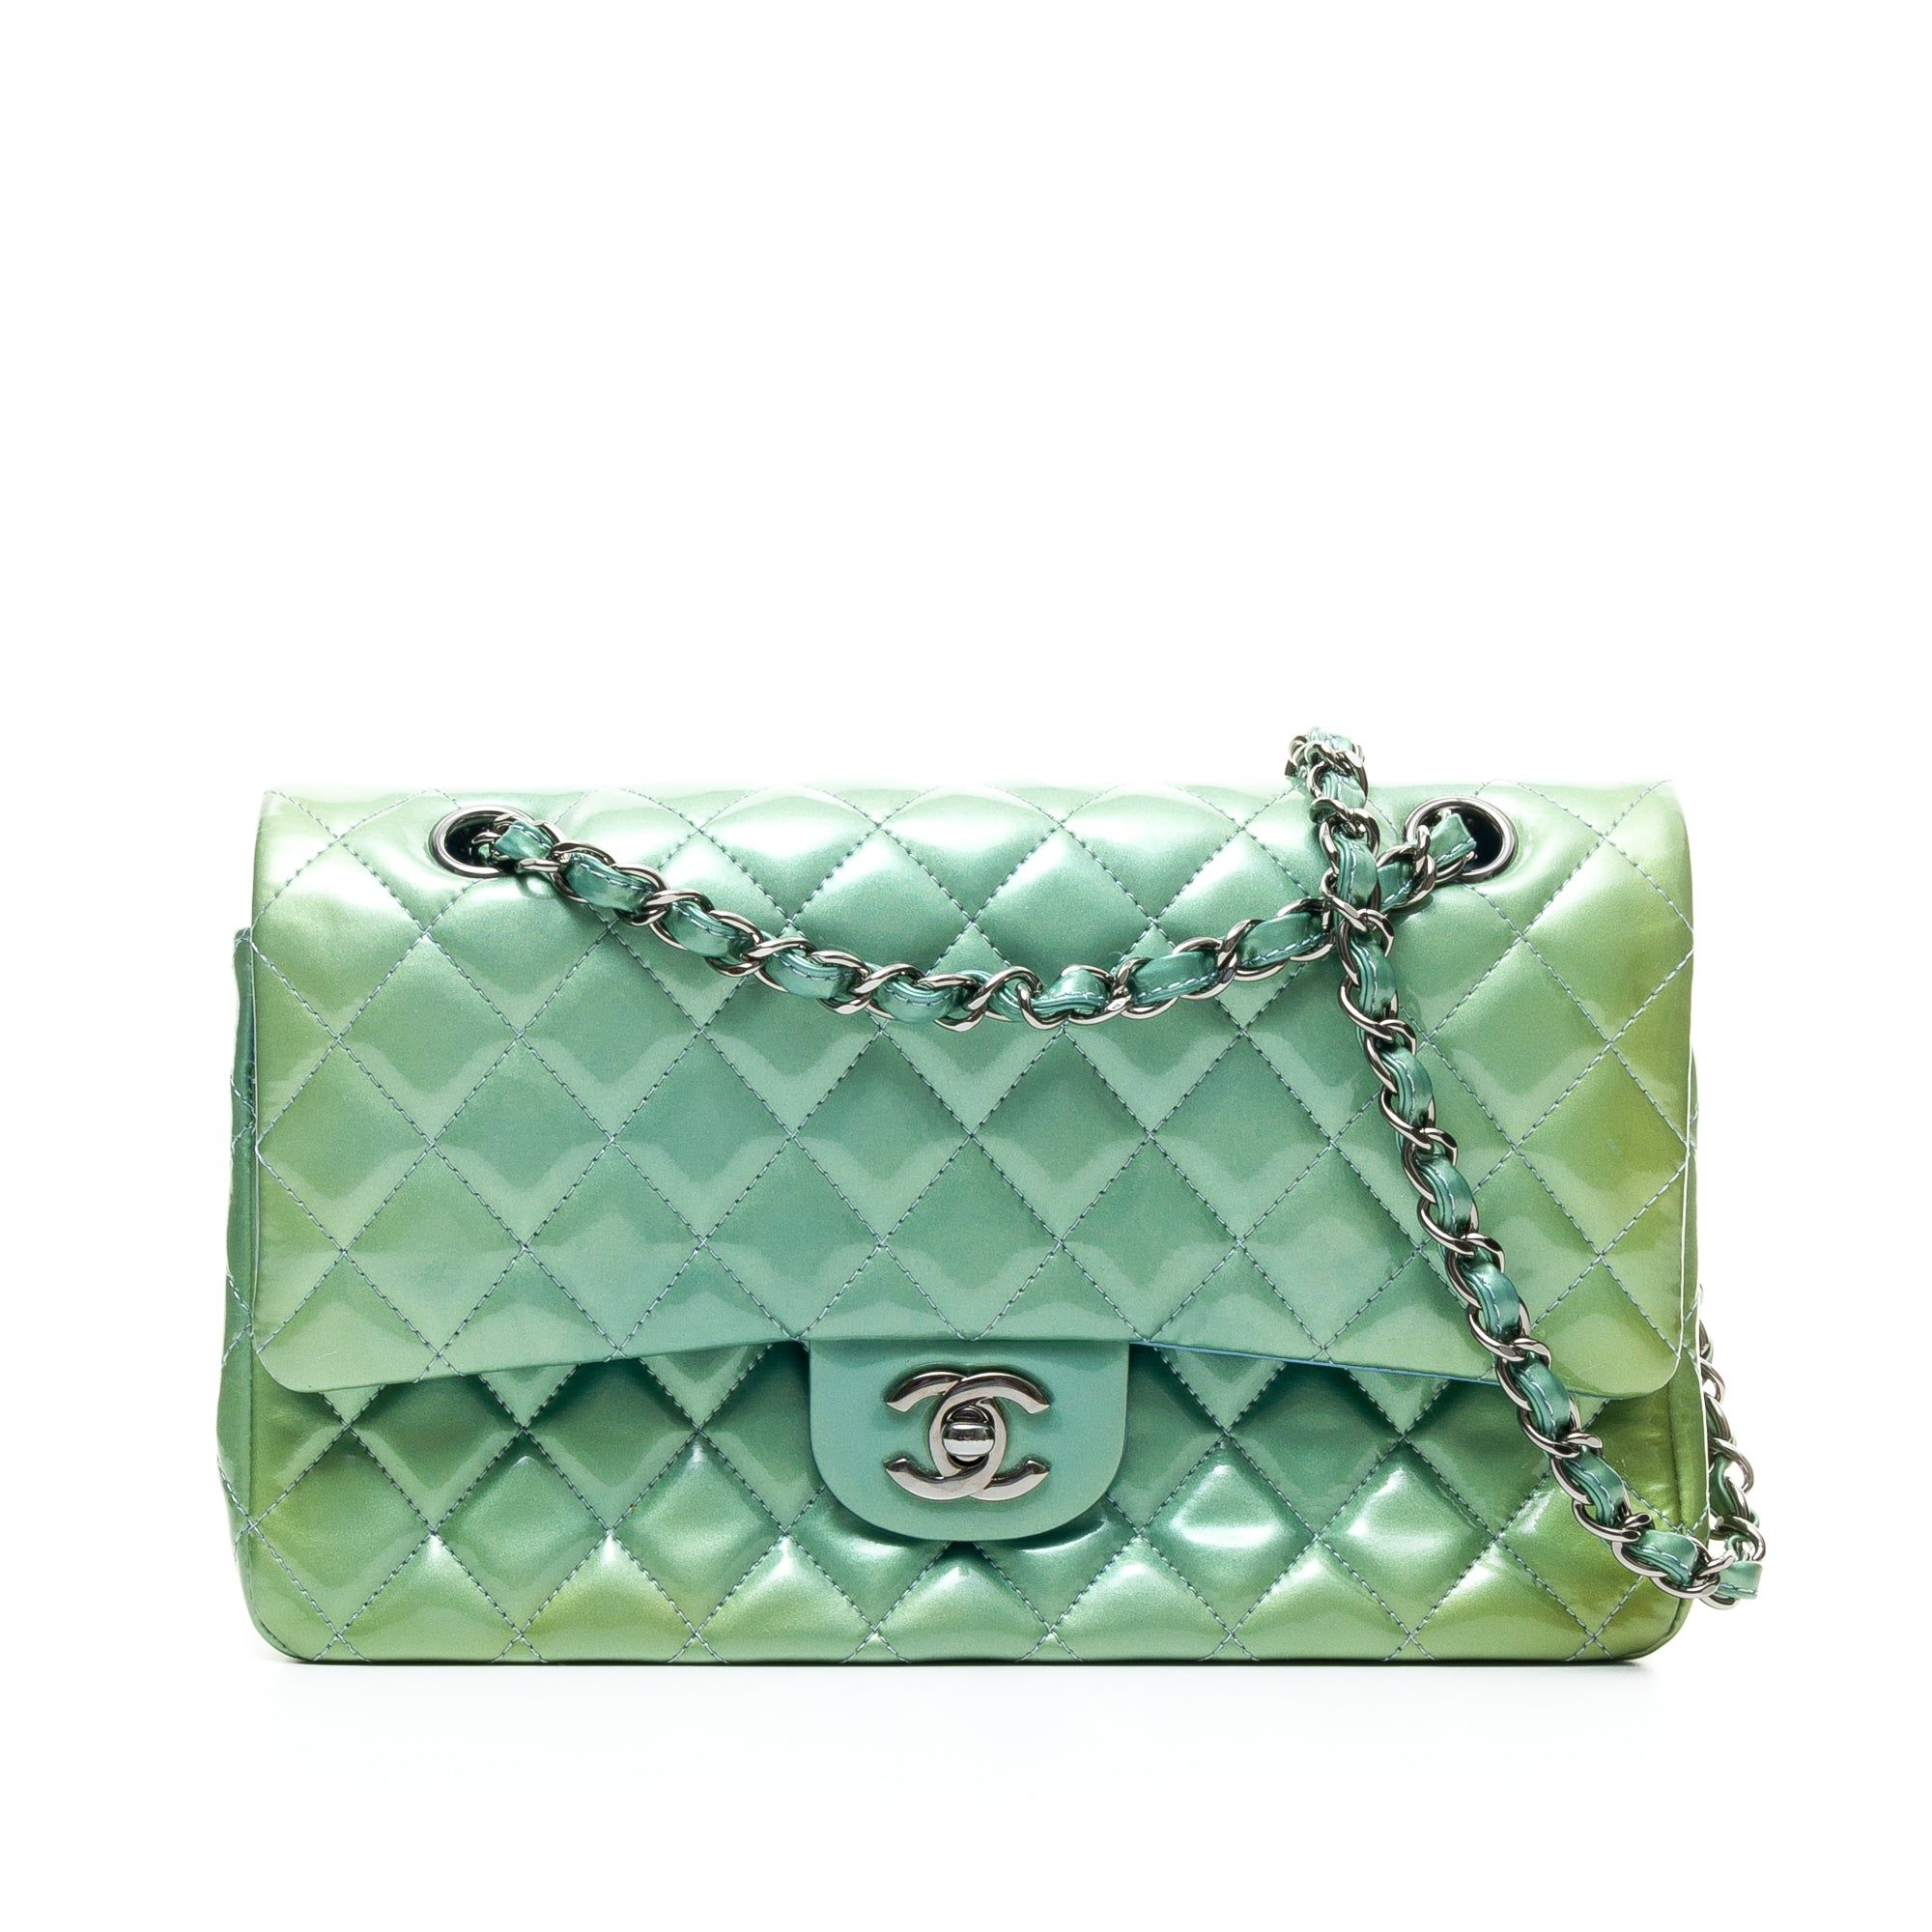 Chanel Classic Double Flap Shoulder bag in Patent Leather, Ruthenium  Hardware Green